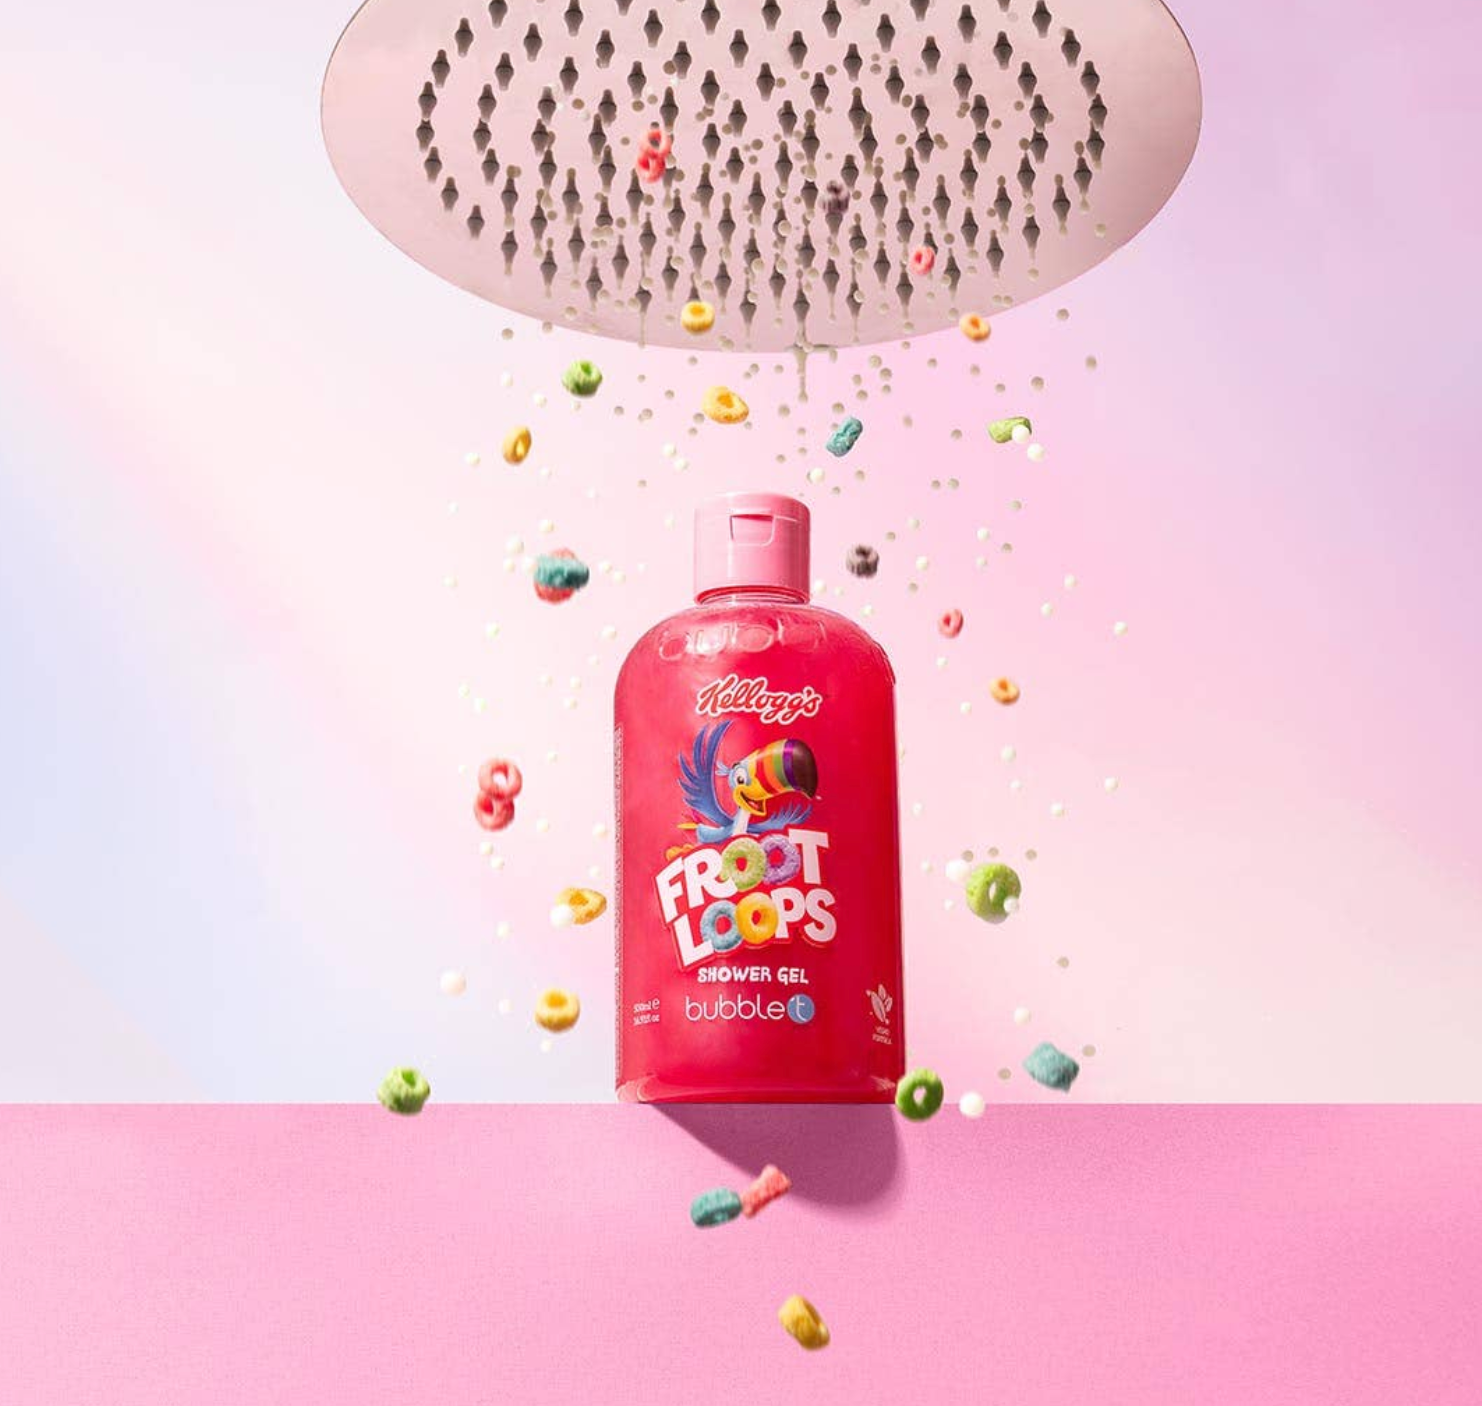 Product Review: Kellogg's Froot Loops Shower Gel